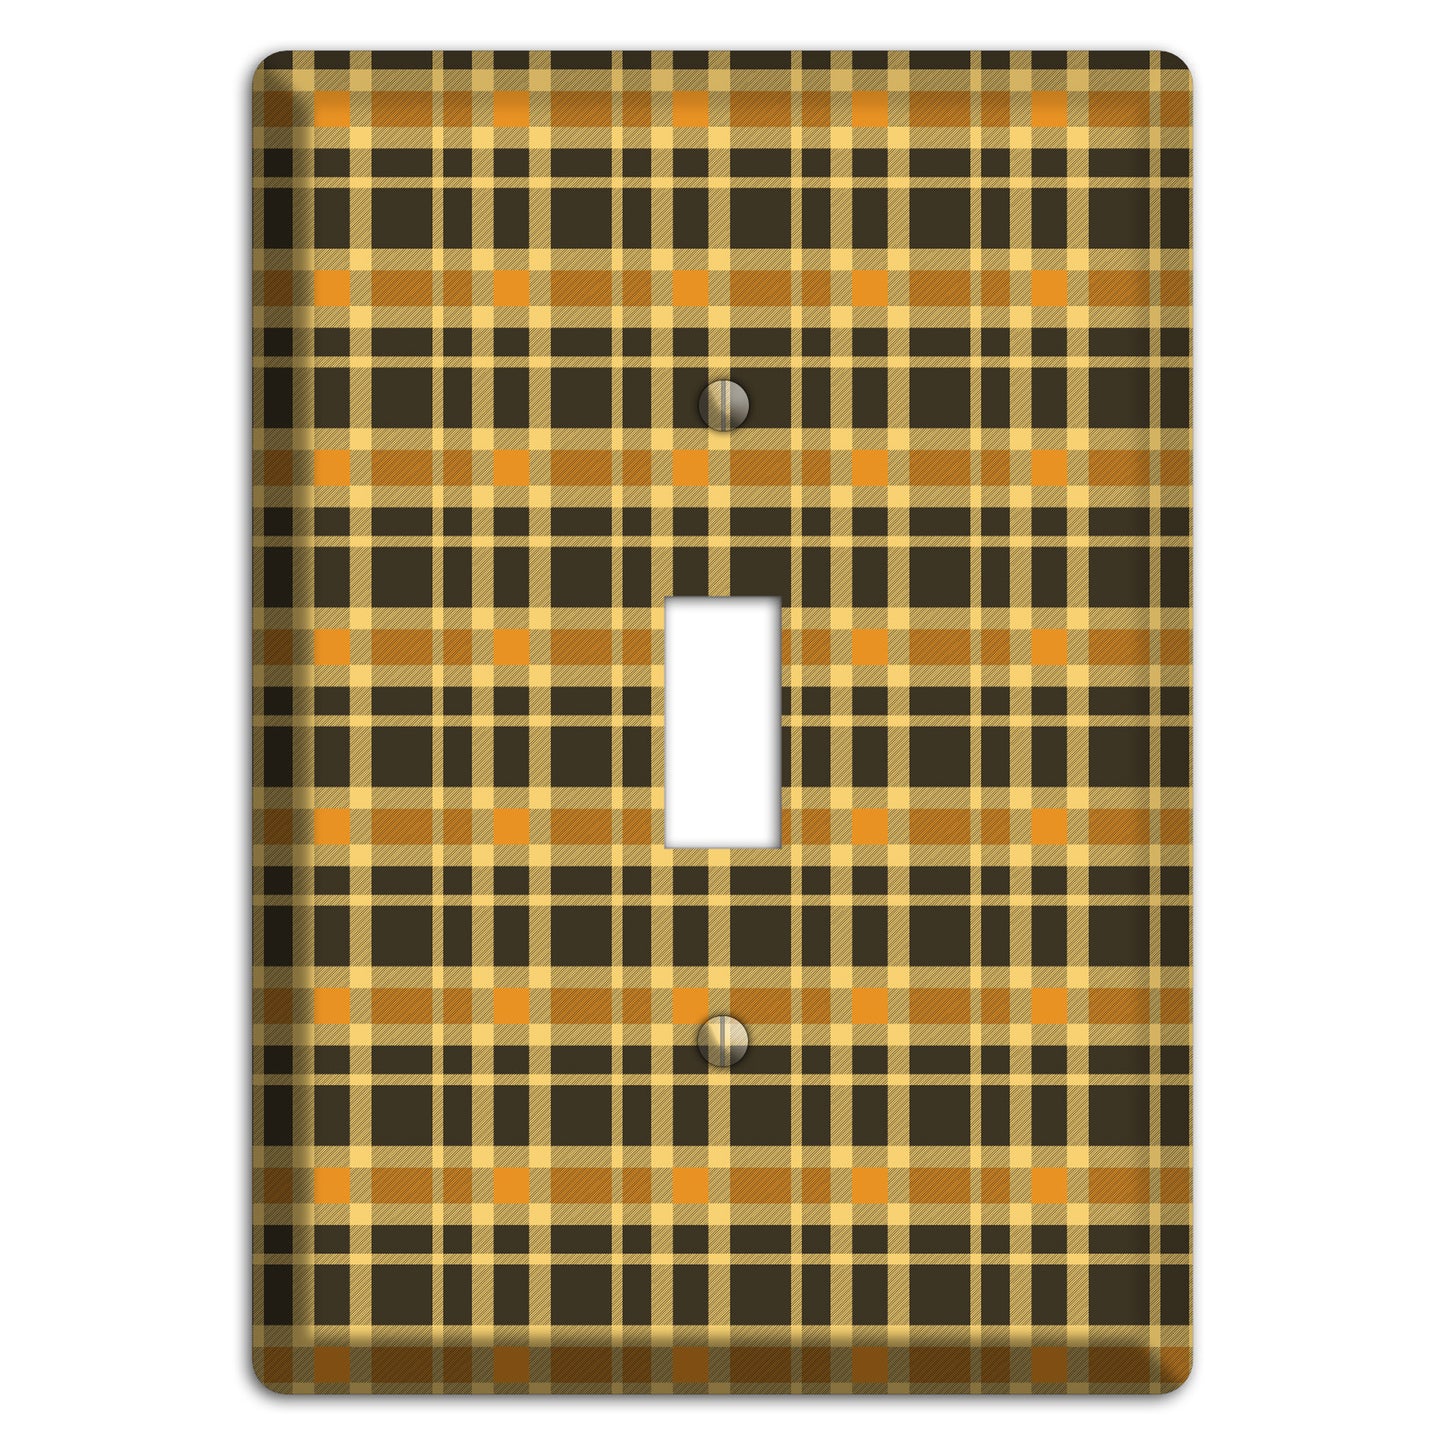 Mustard and Black Plaid Cover Plates